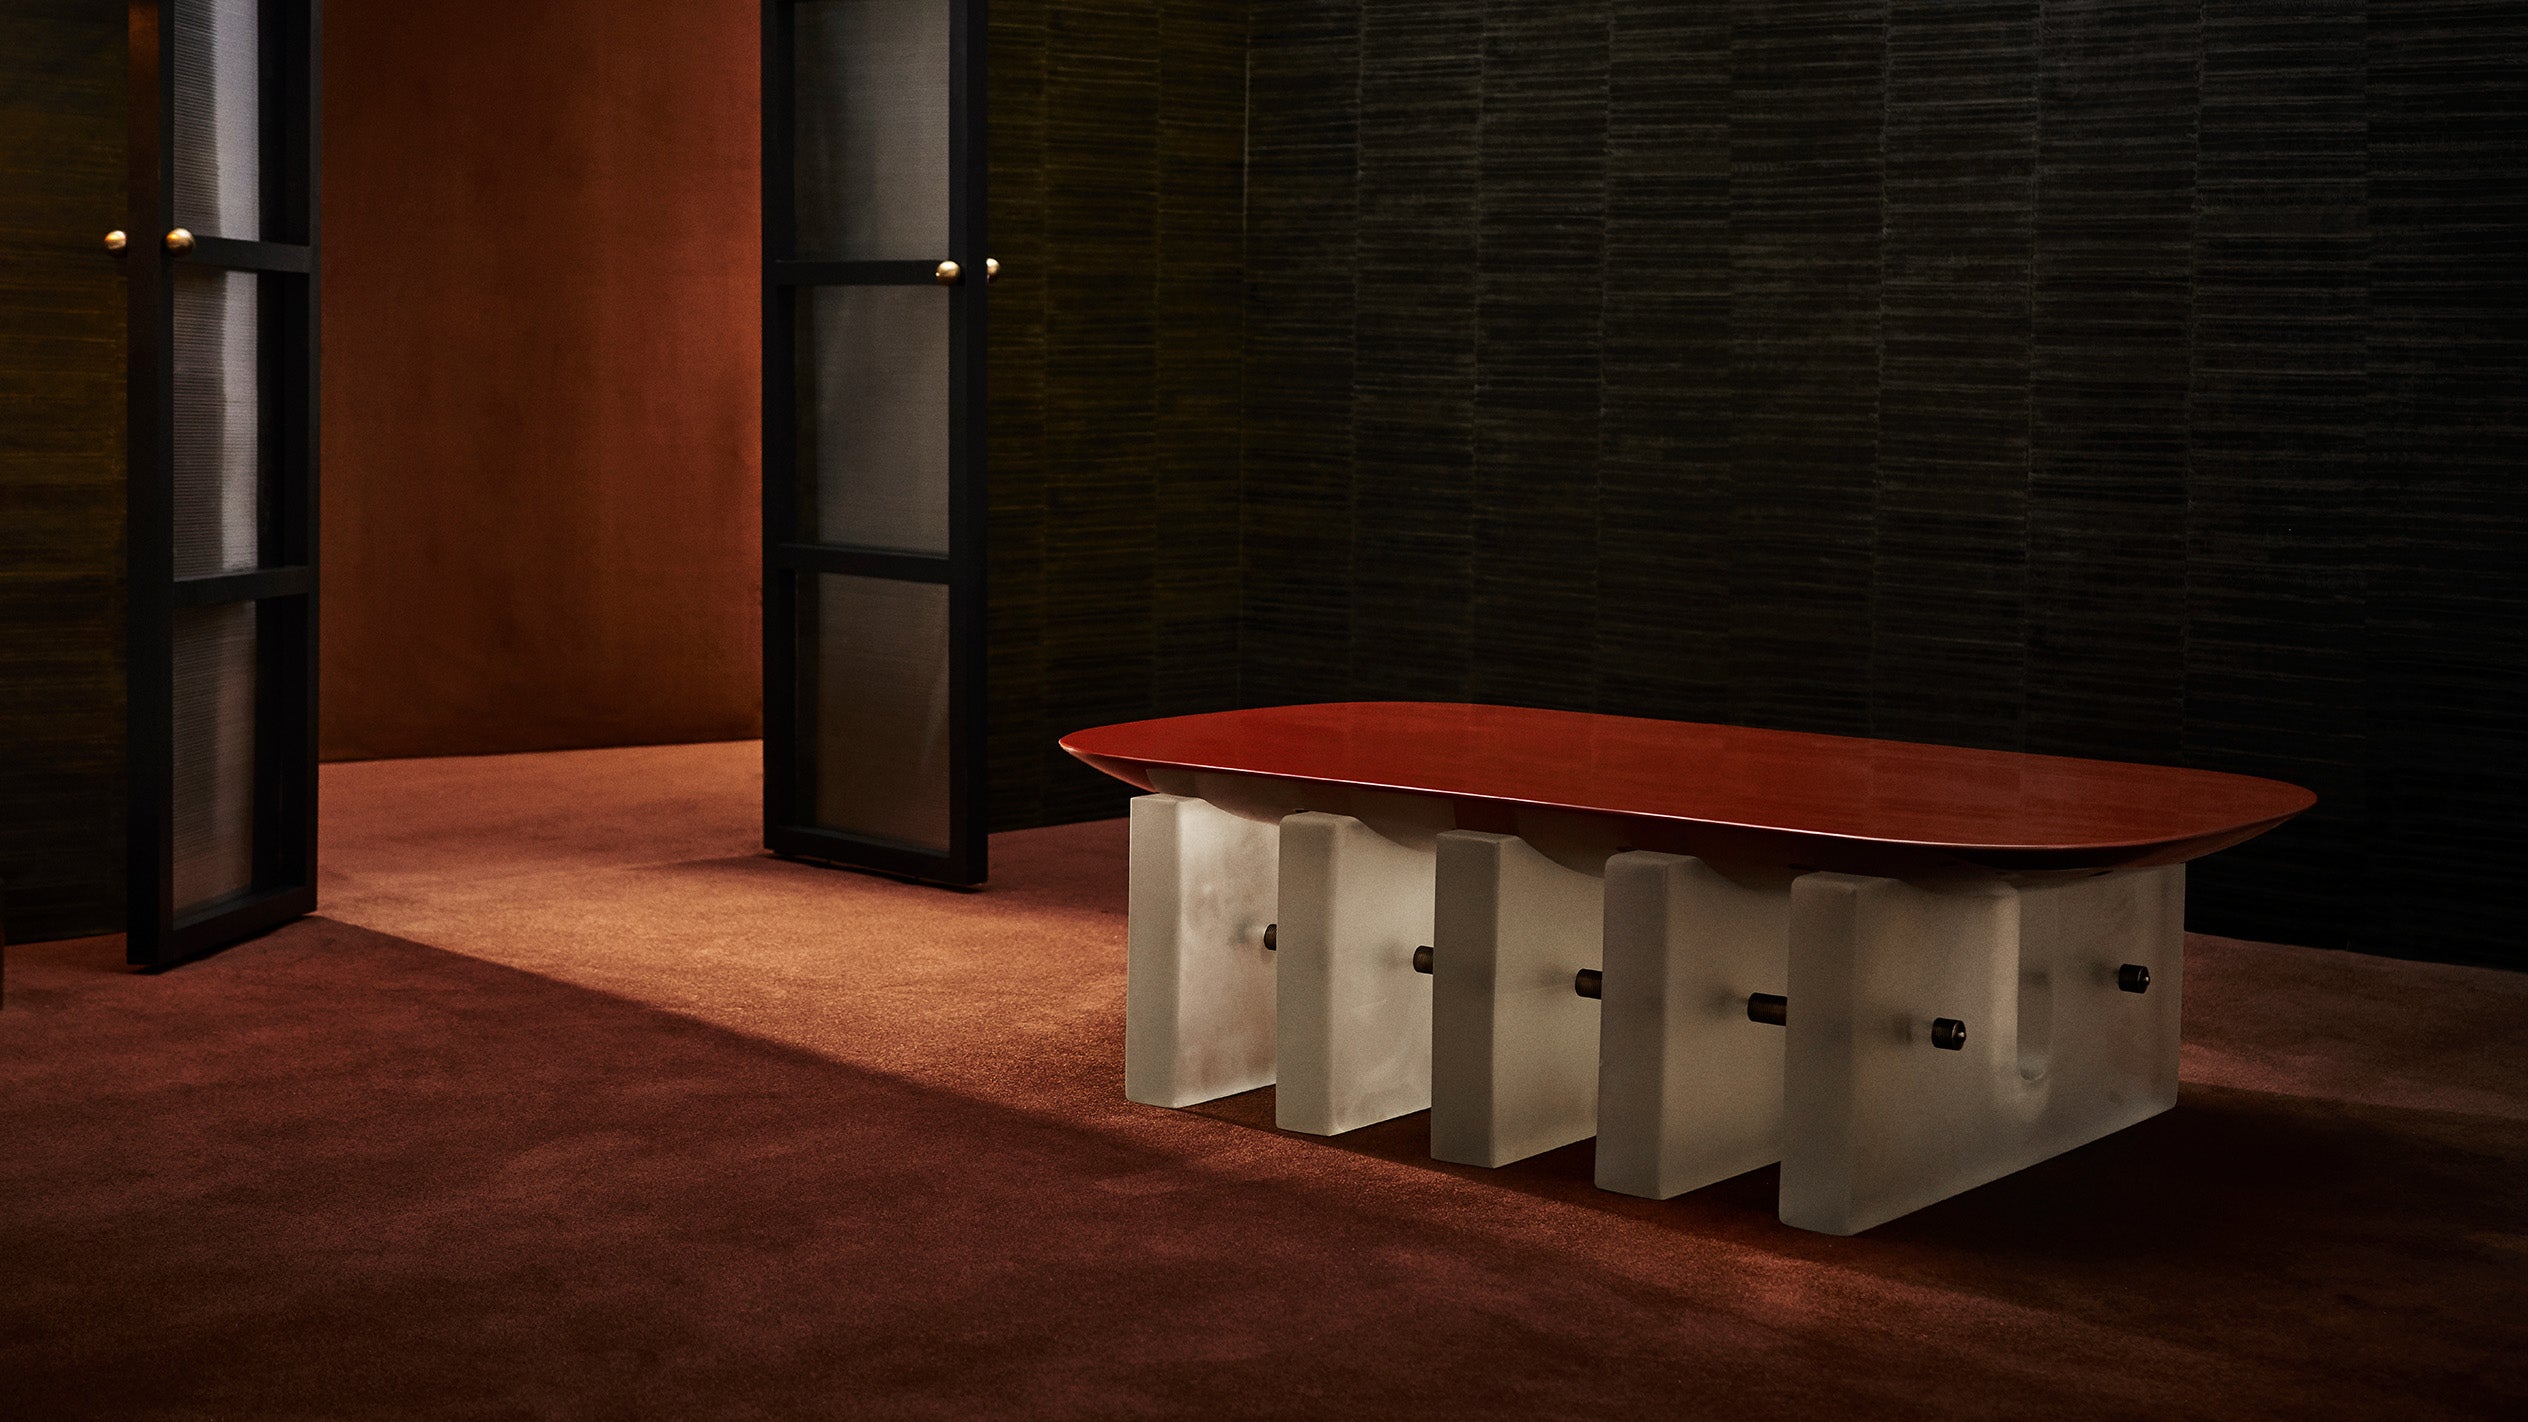 SEGMENT coffee table in Cinnabar Lacquer in a room with two open glass doors.